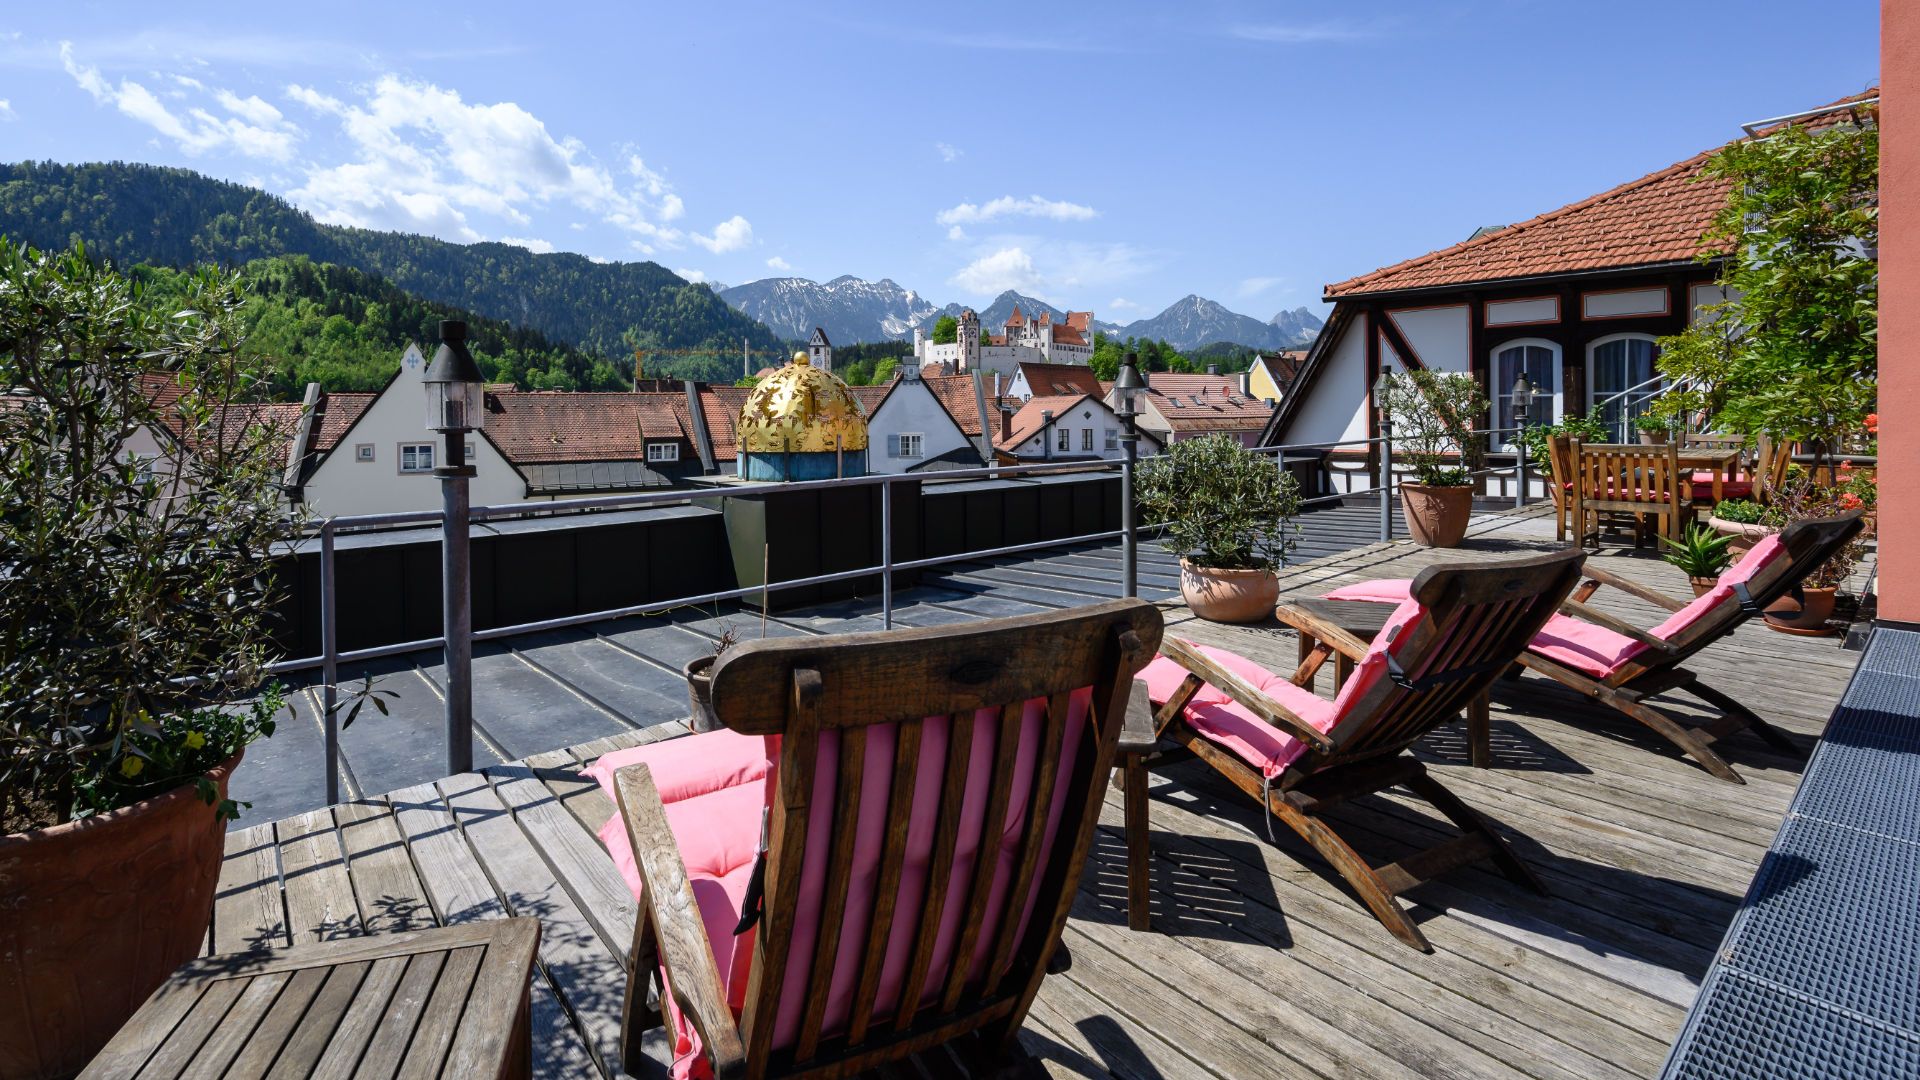 Roof terrace with a view of the High Castle